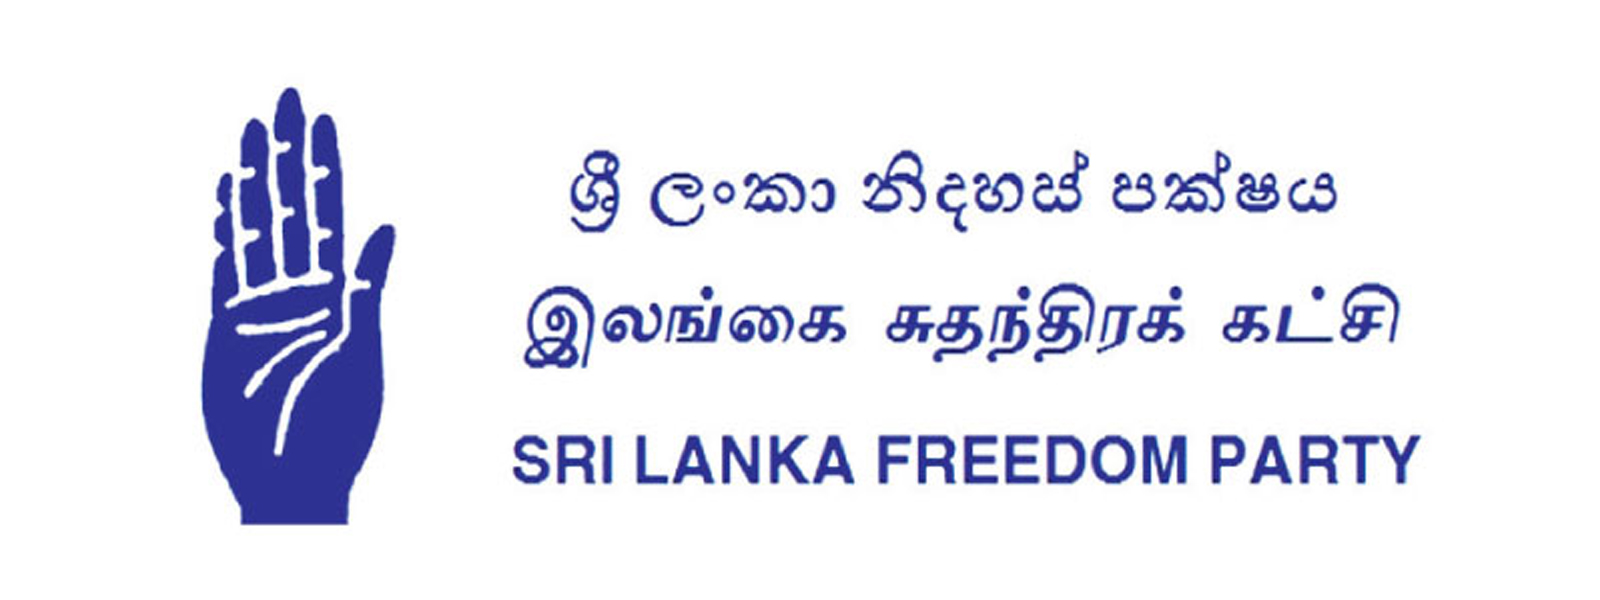 Why did some SLFP Ministers support NCM?